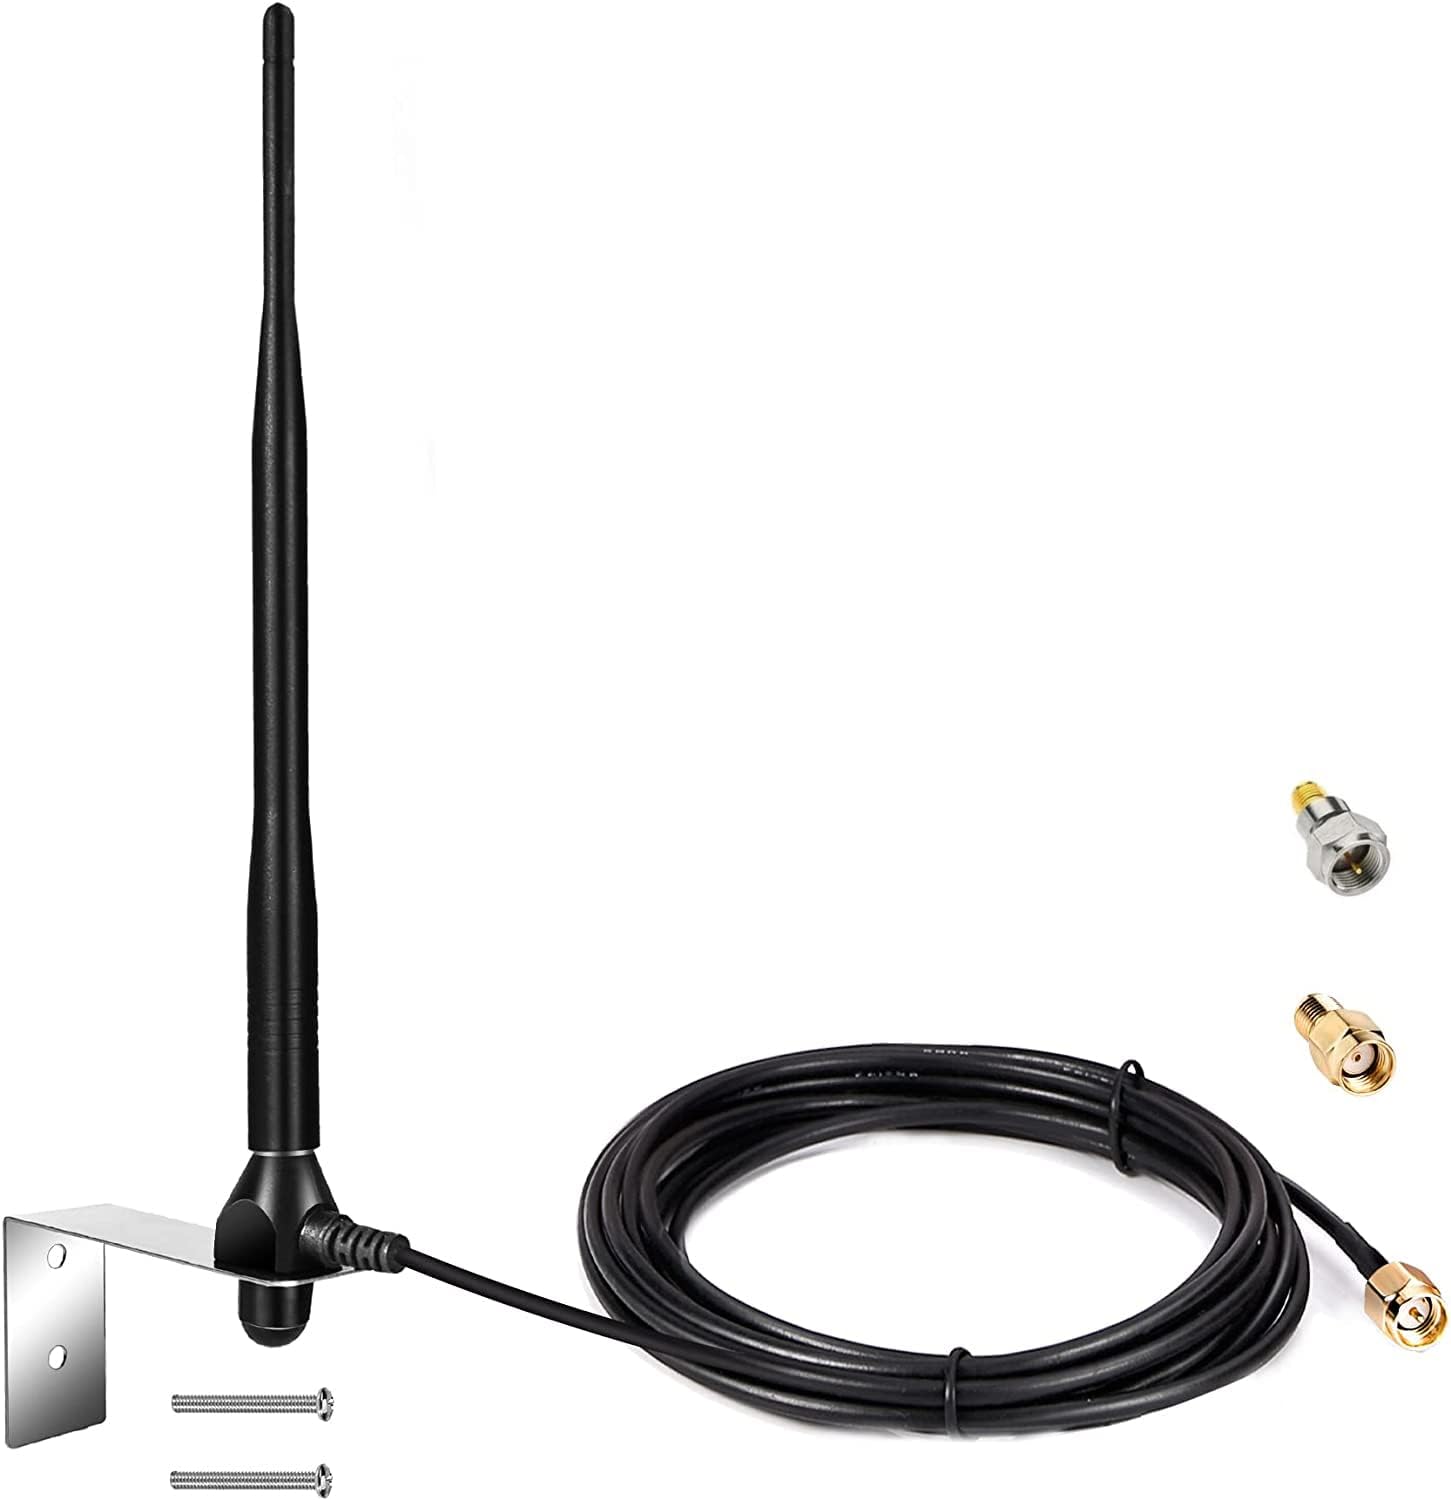 Nelawya Smart Gate Door Opener Antenna 433.92 MHz Long Range Receiver 10 feet Low Loss Cable Antenna Compatible with All Series